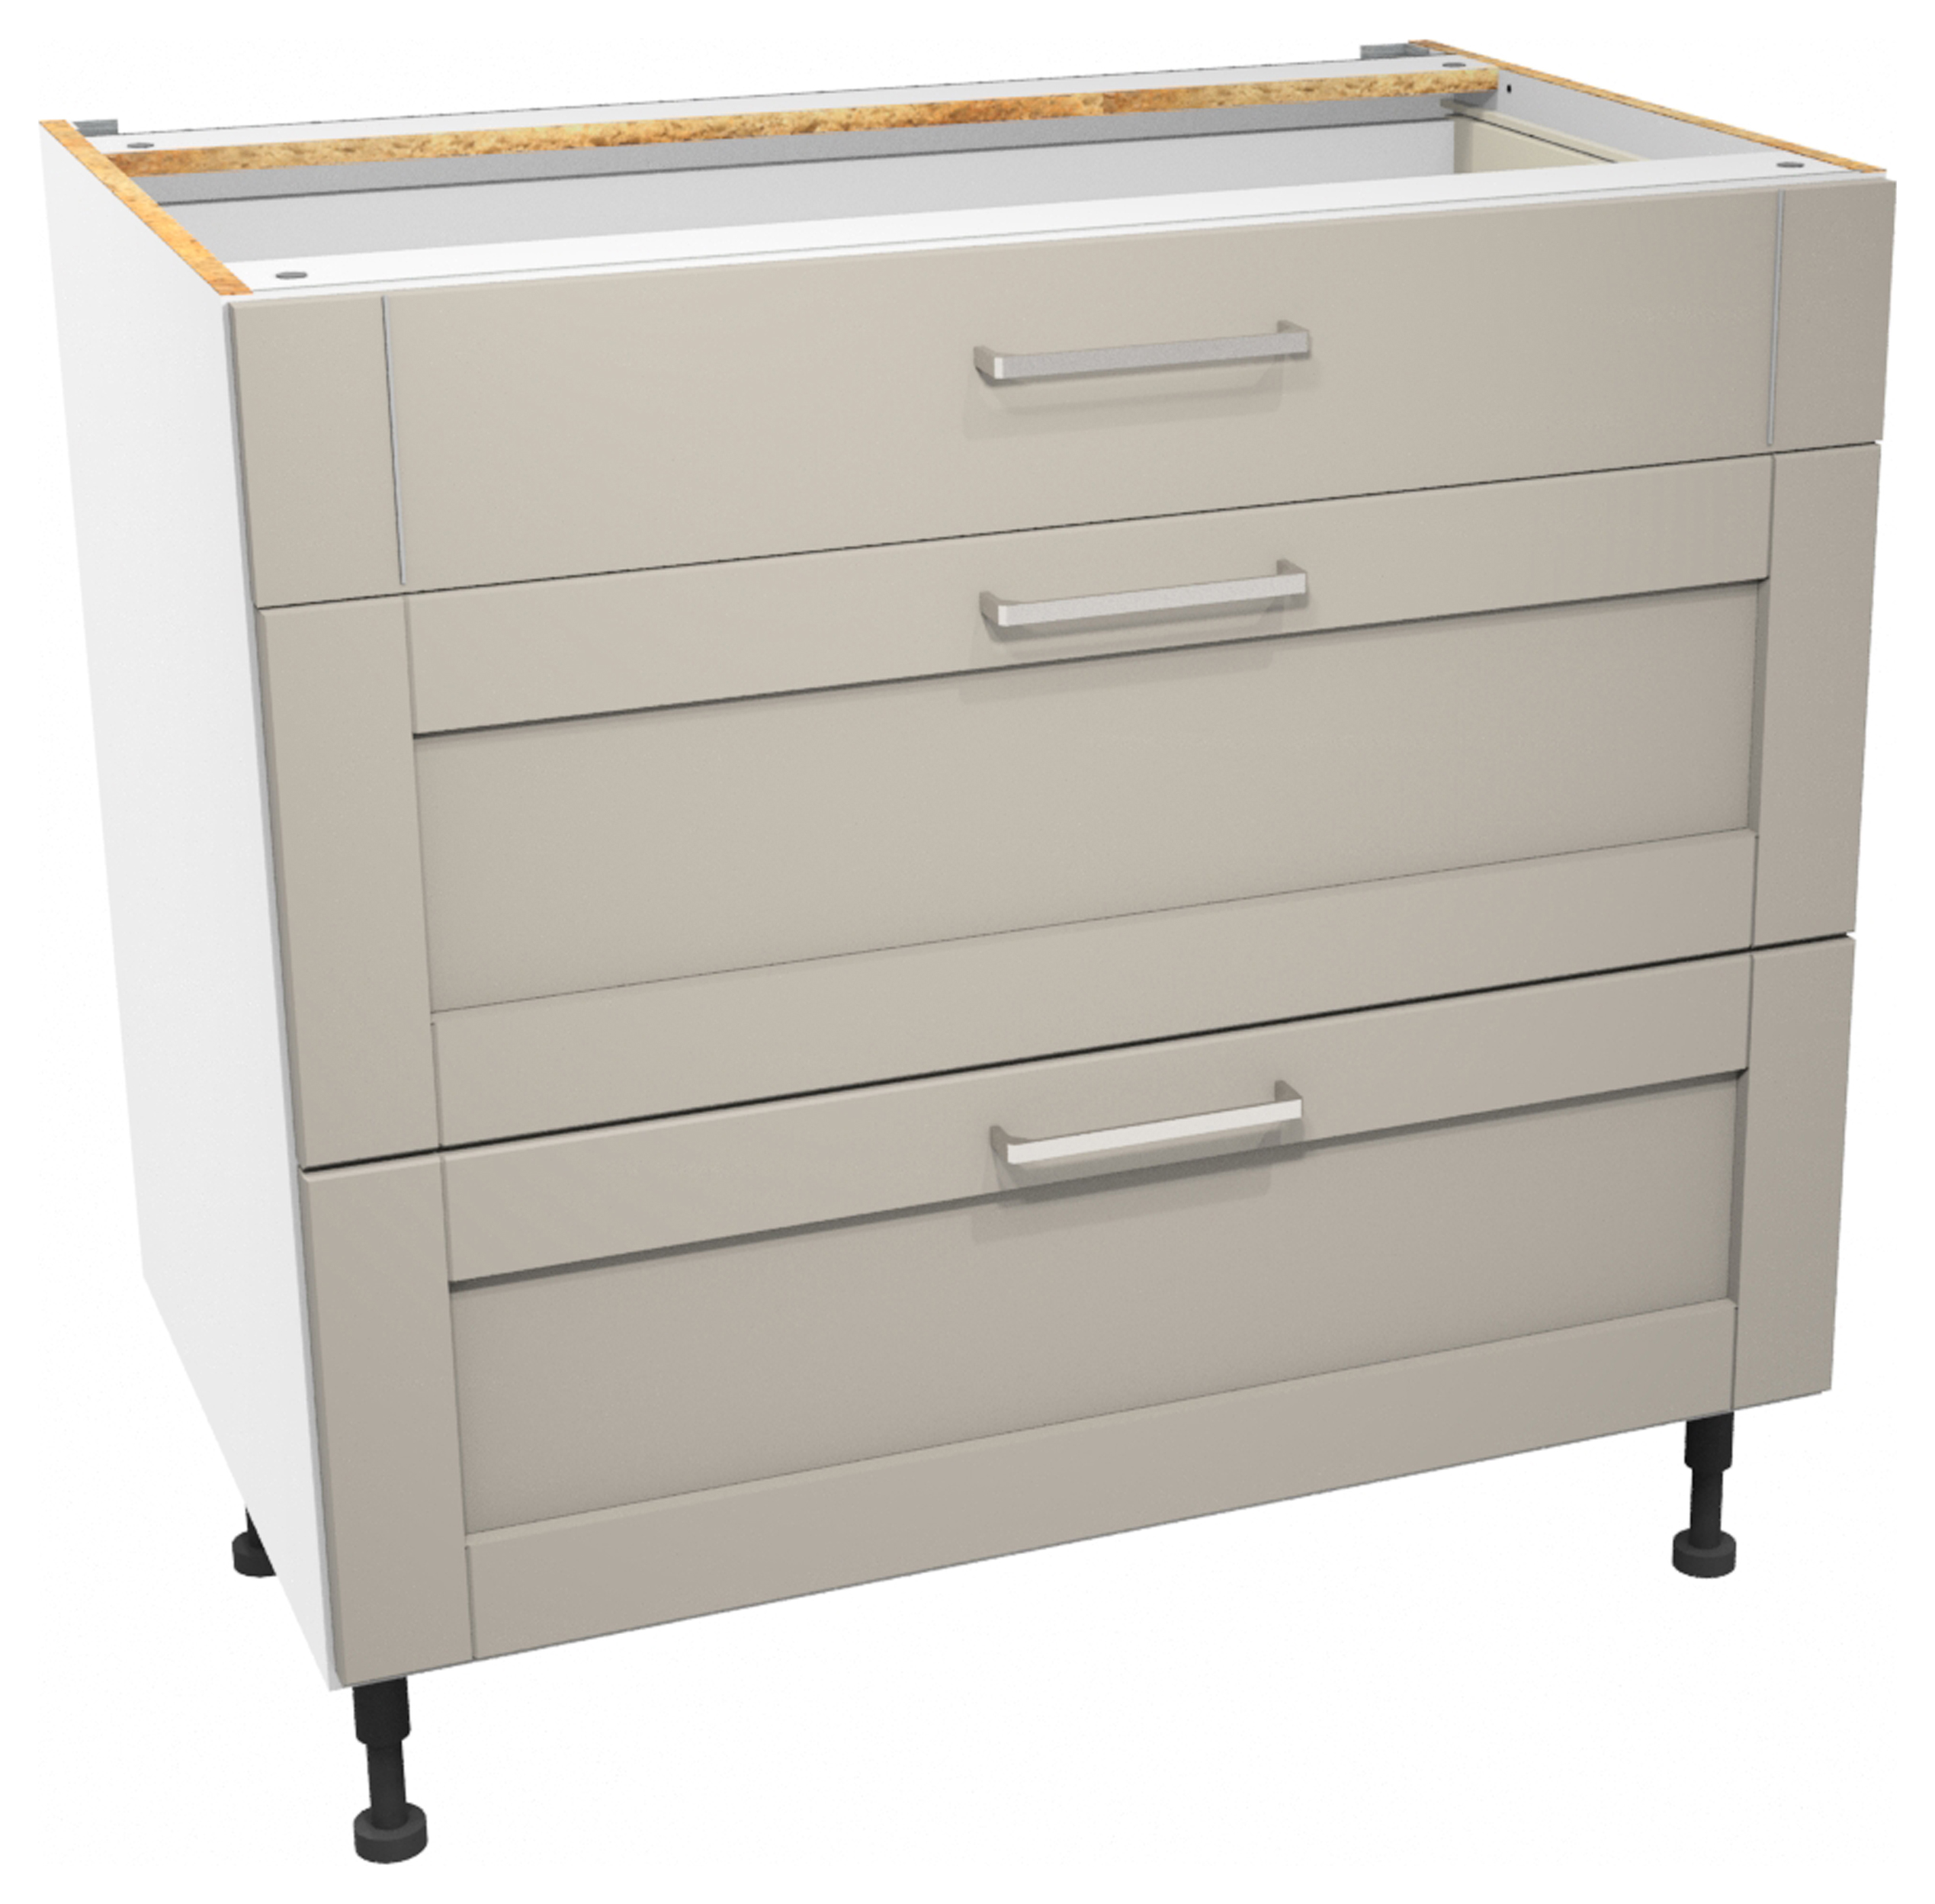 Image of Wickes Ohio Stone Shaker Drawer Unit - 900mm (Part 1 of 2)